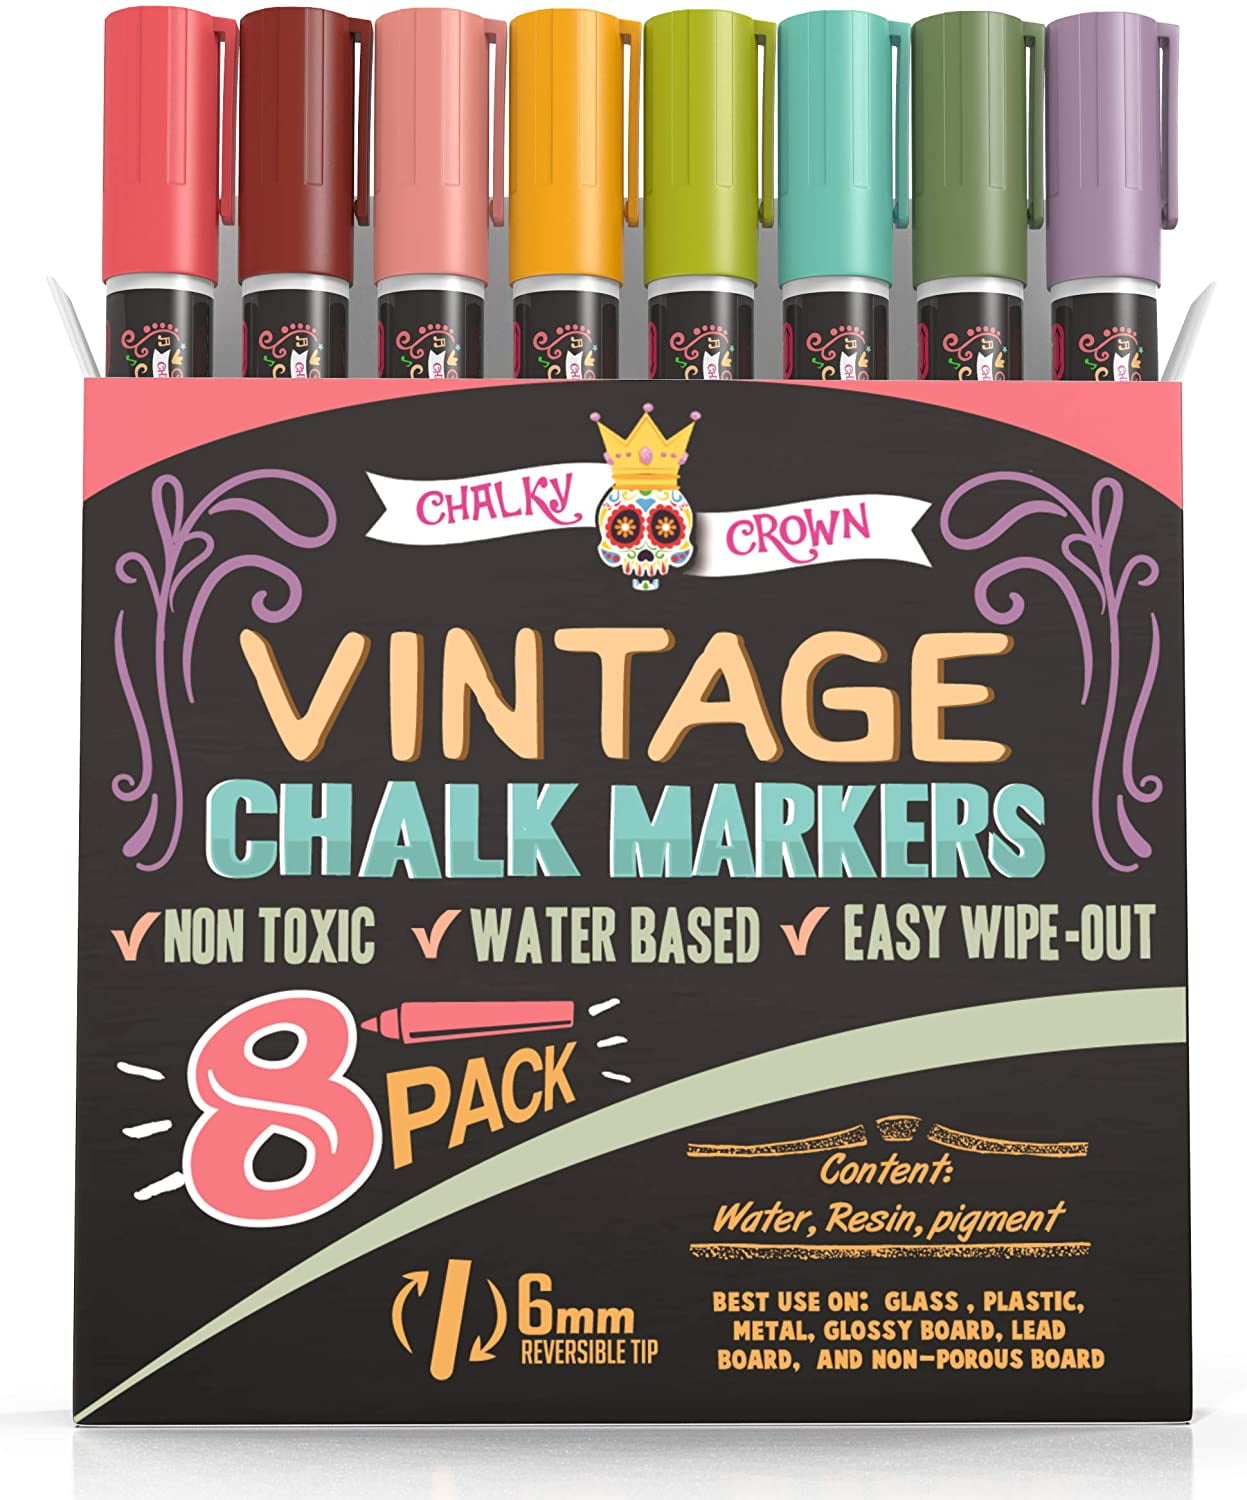 Chalktastic Chalk Markers, Chalkboard Markers with Reversible 6mm Fine or Chisel Tip, Erasable Liquid Chalk Markers for Menu Board, Glass